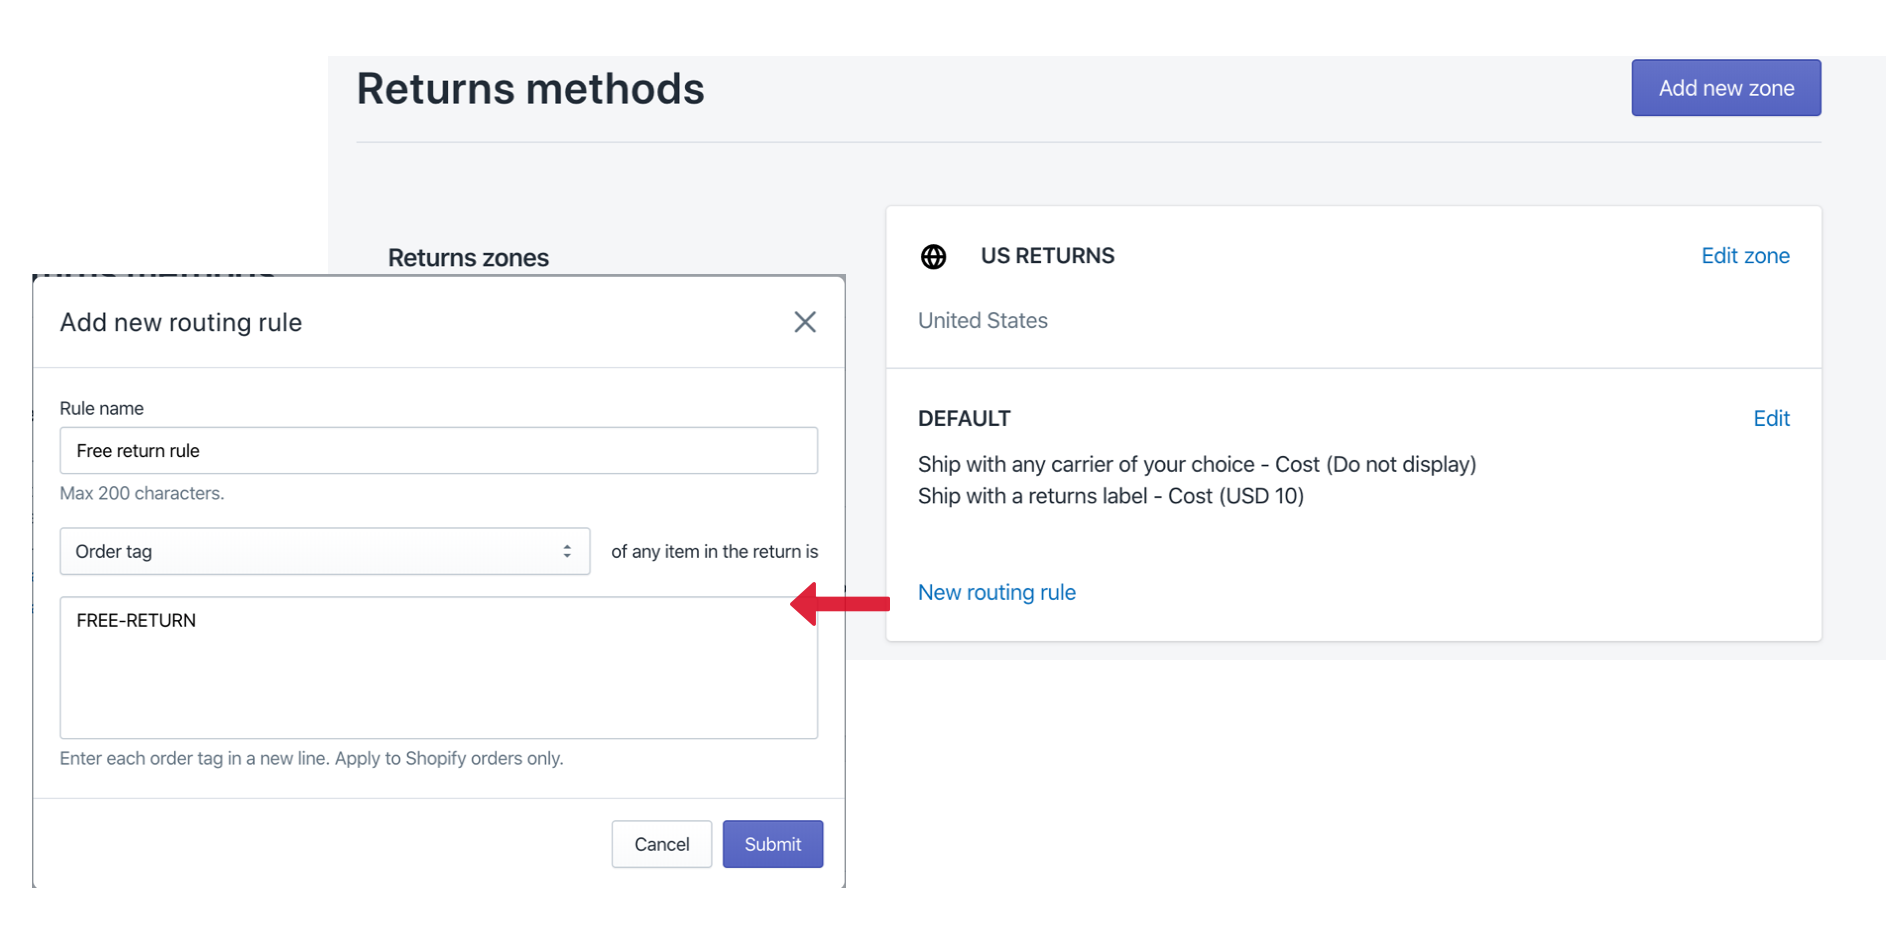 Product update: Setup routing rule based on order tag